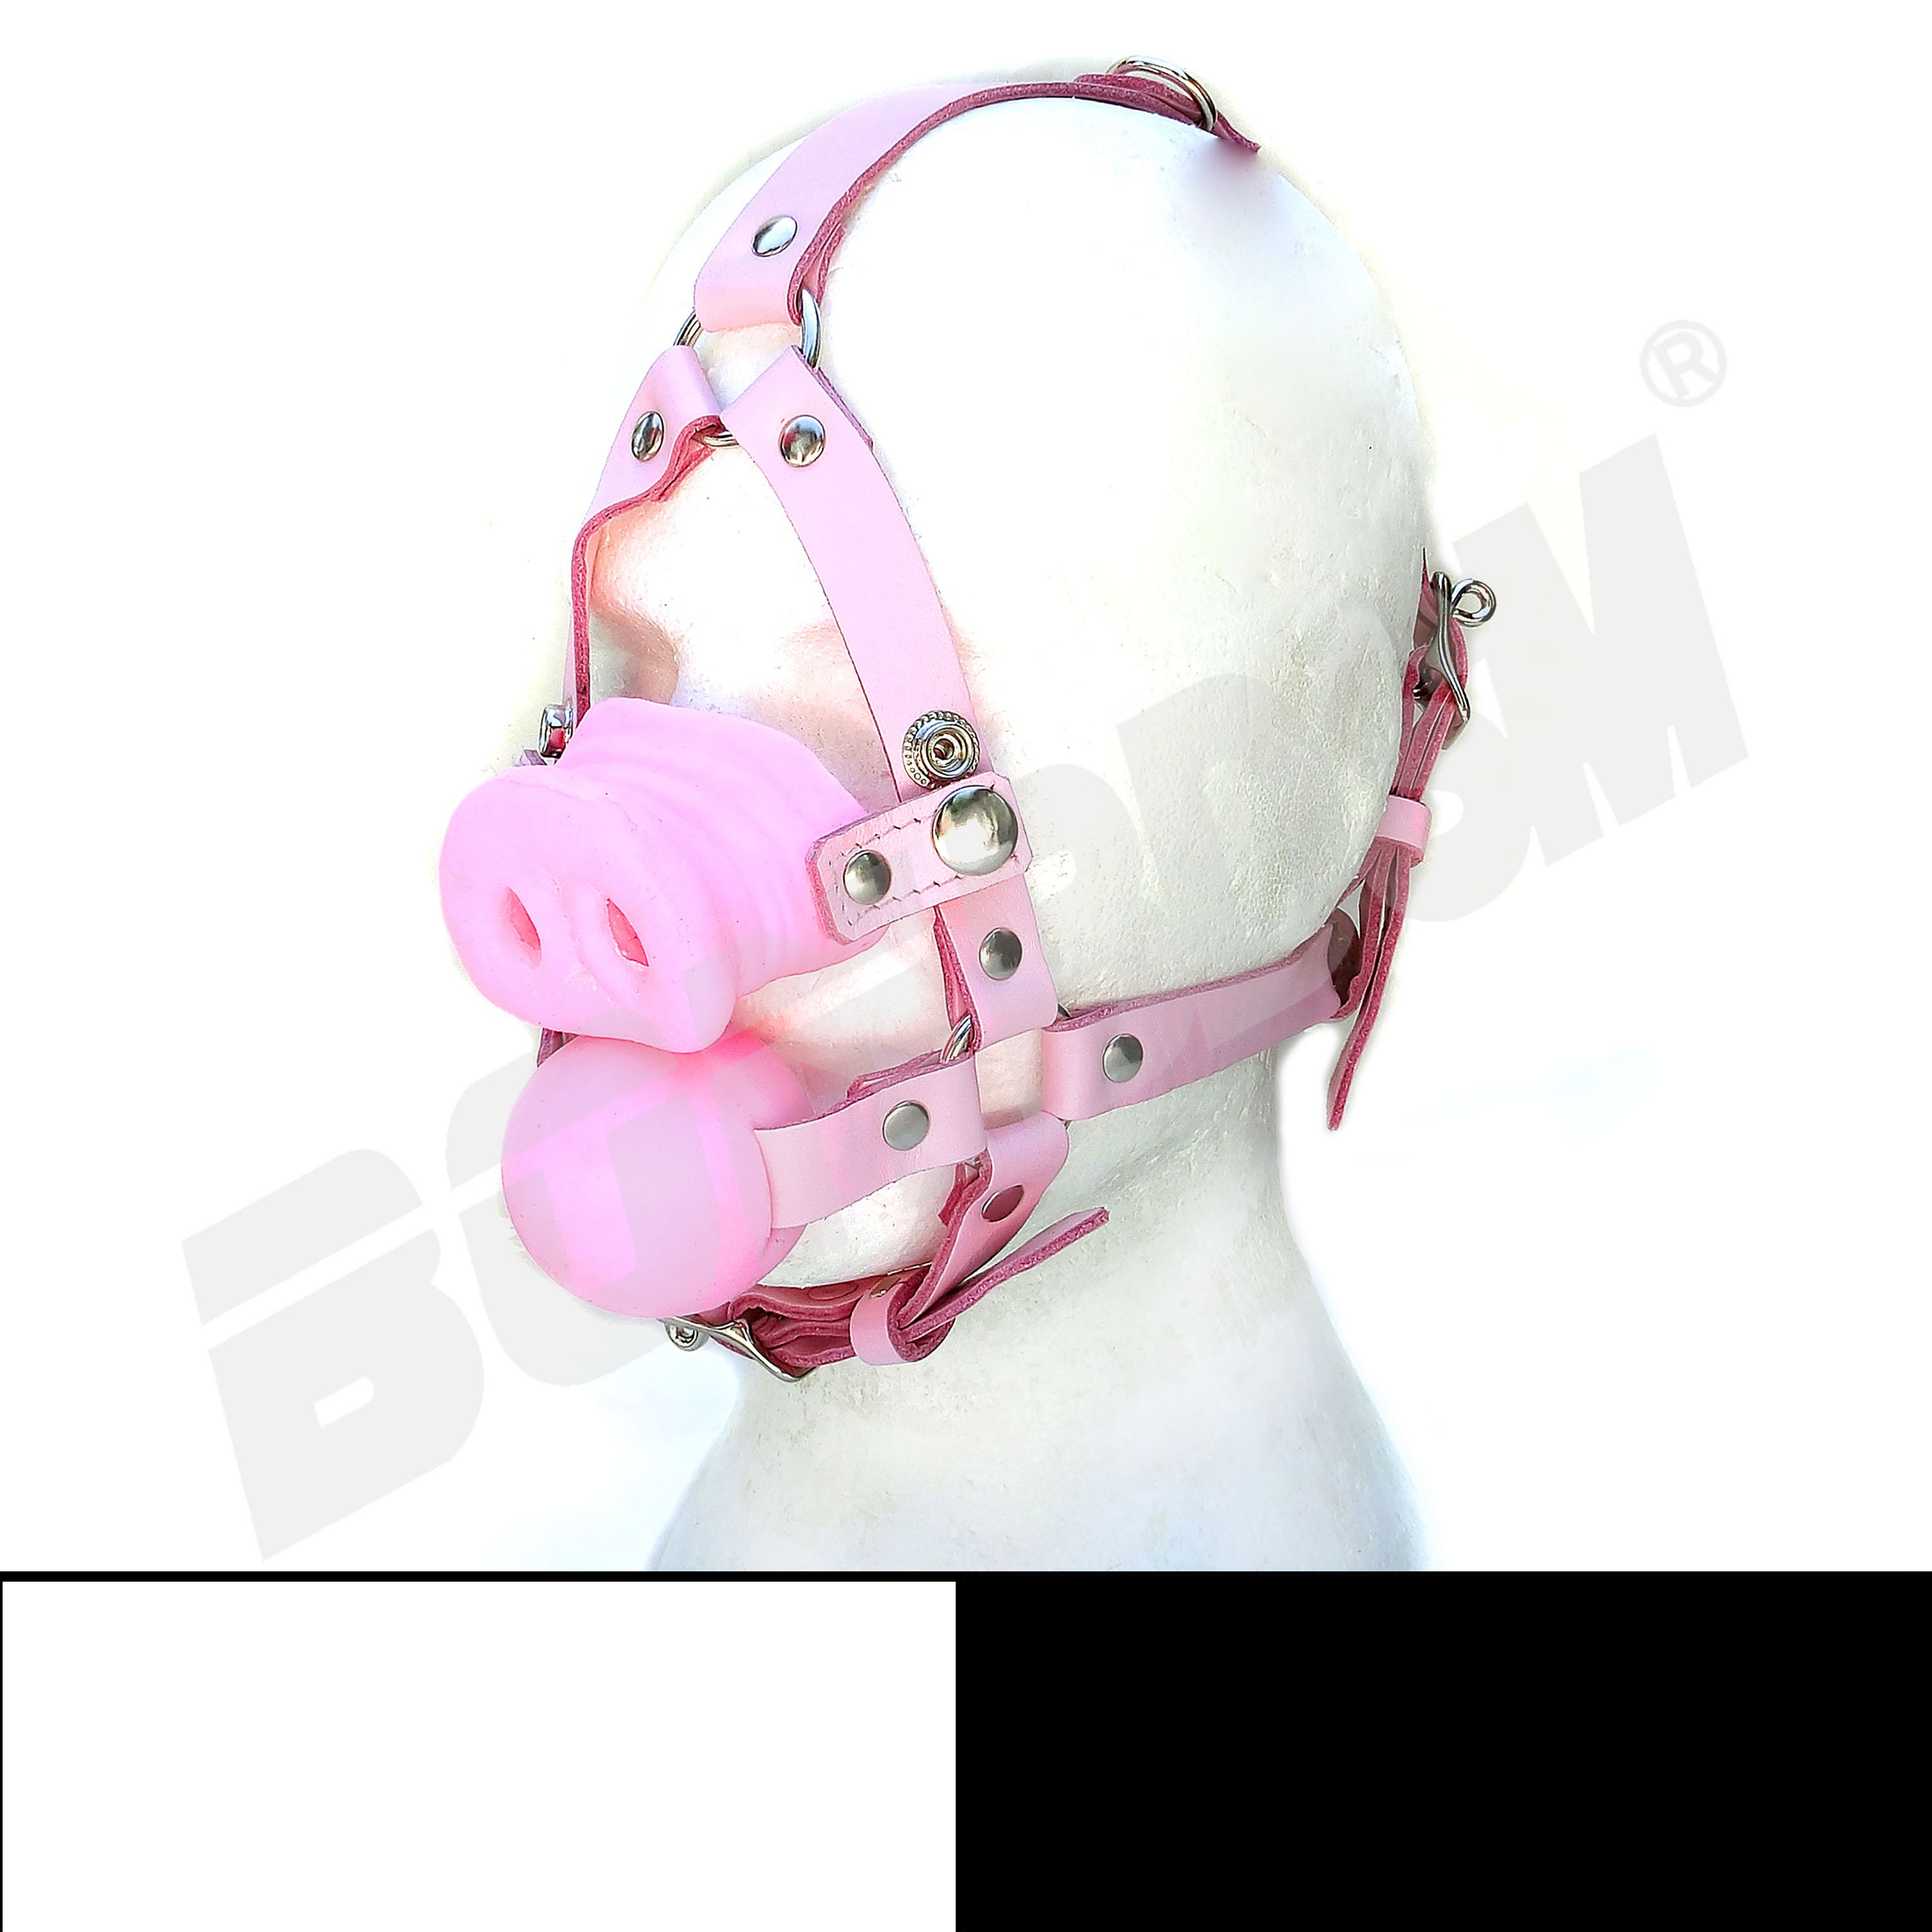 Bdsm Pig Ball Gag Harness Quality Leather Non Toxic Etsy Uk